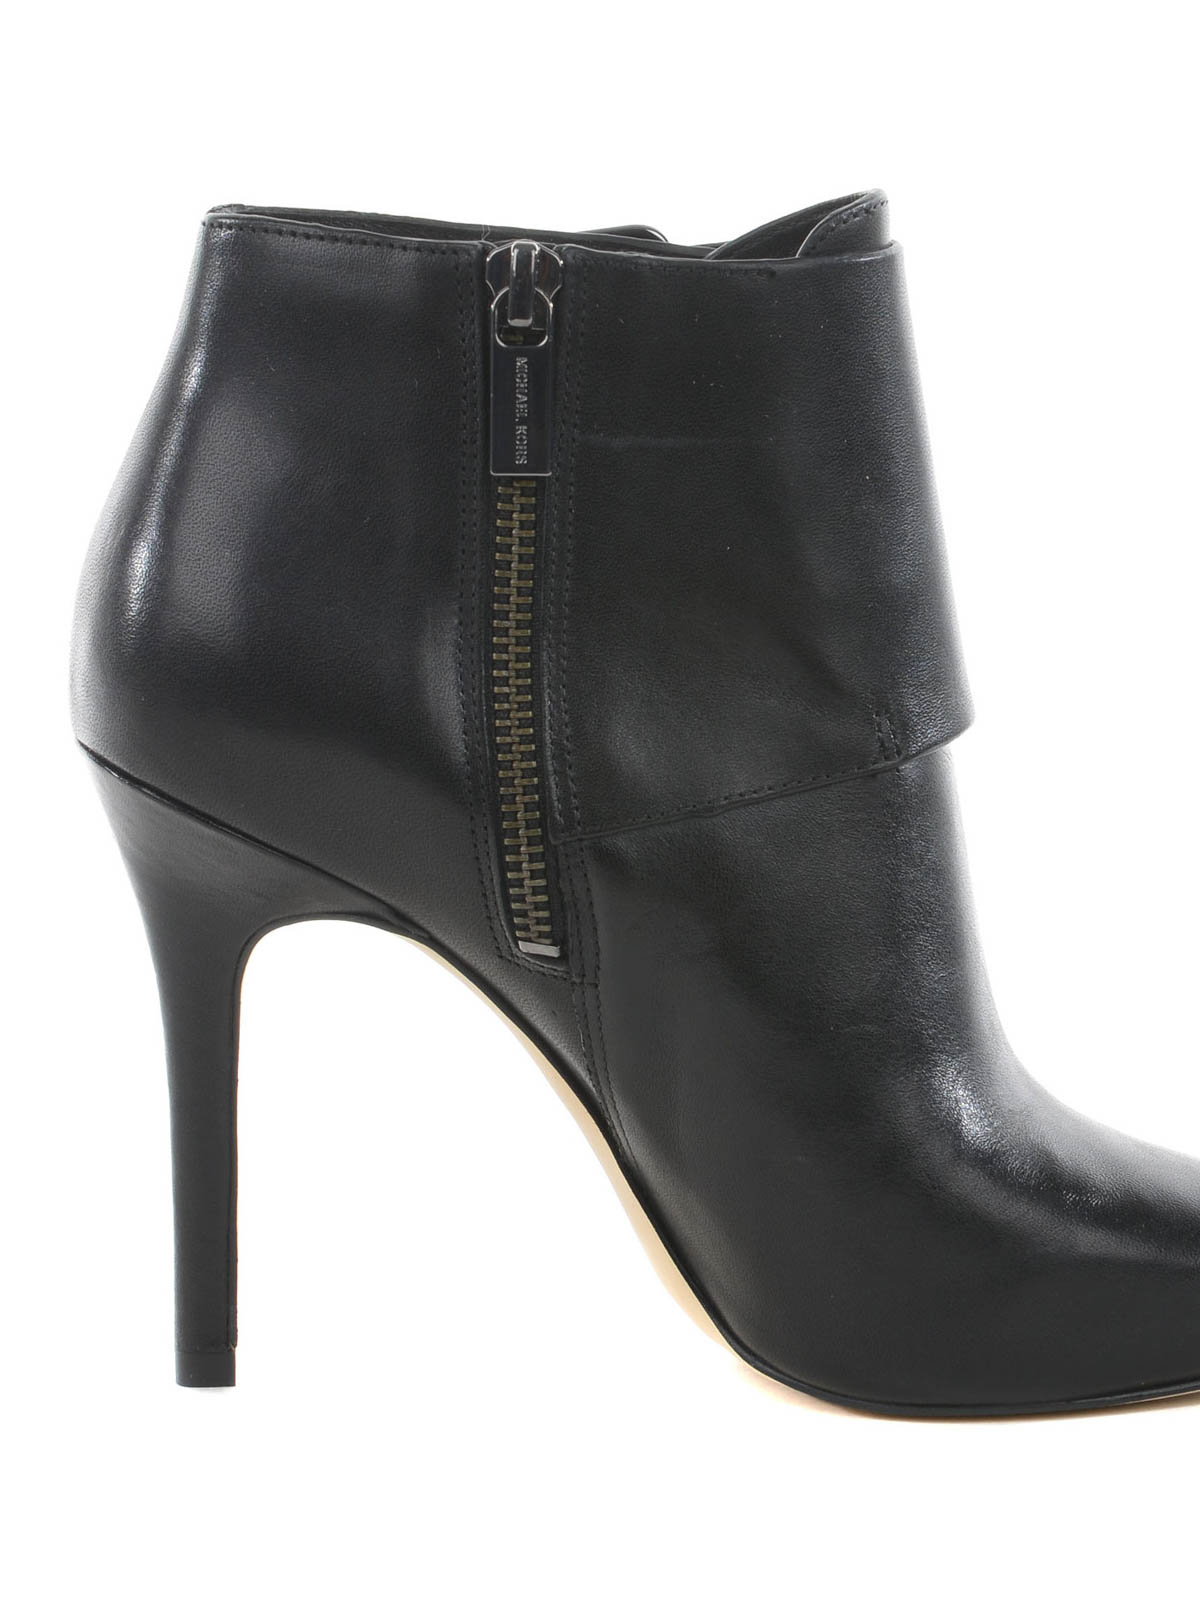 Ankle boots Michael Kors - Prudence leather ankle boots - 40F5PRHE5L001